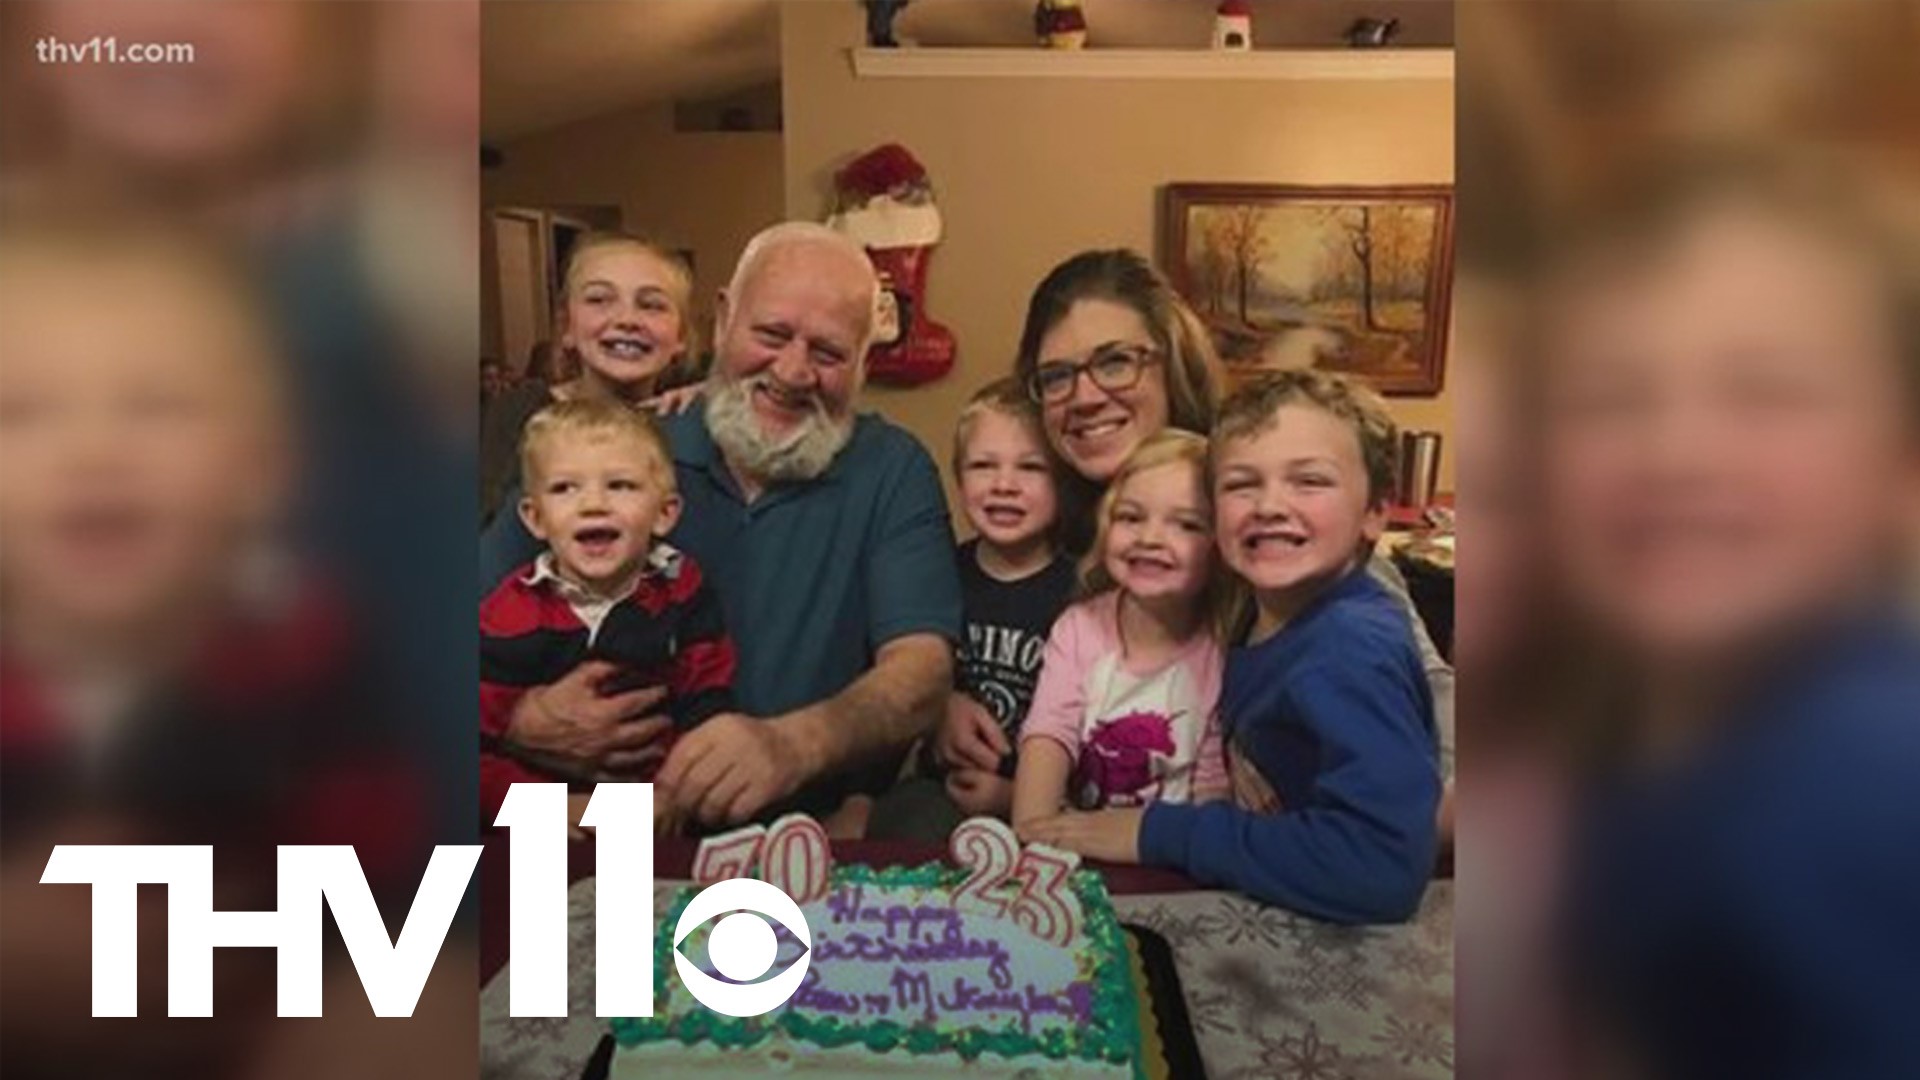 A Bryant family is praying for a Christmas miracle, hoping their loved one can come home for the holidays as he fights COVID-19 from a hospital.